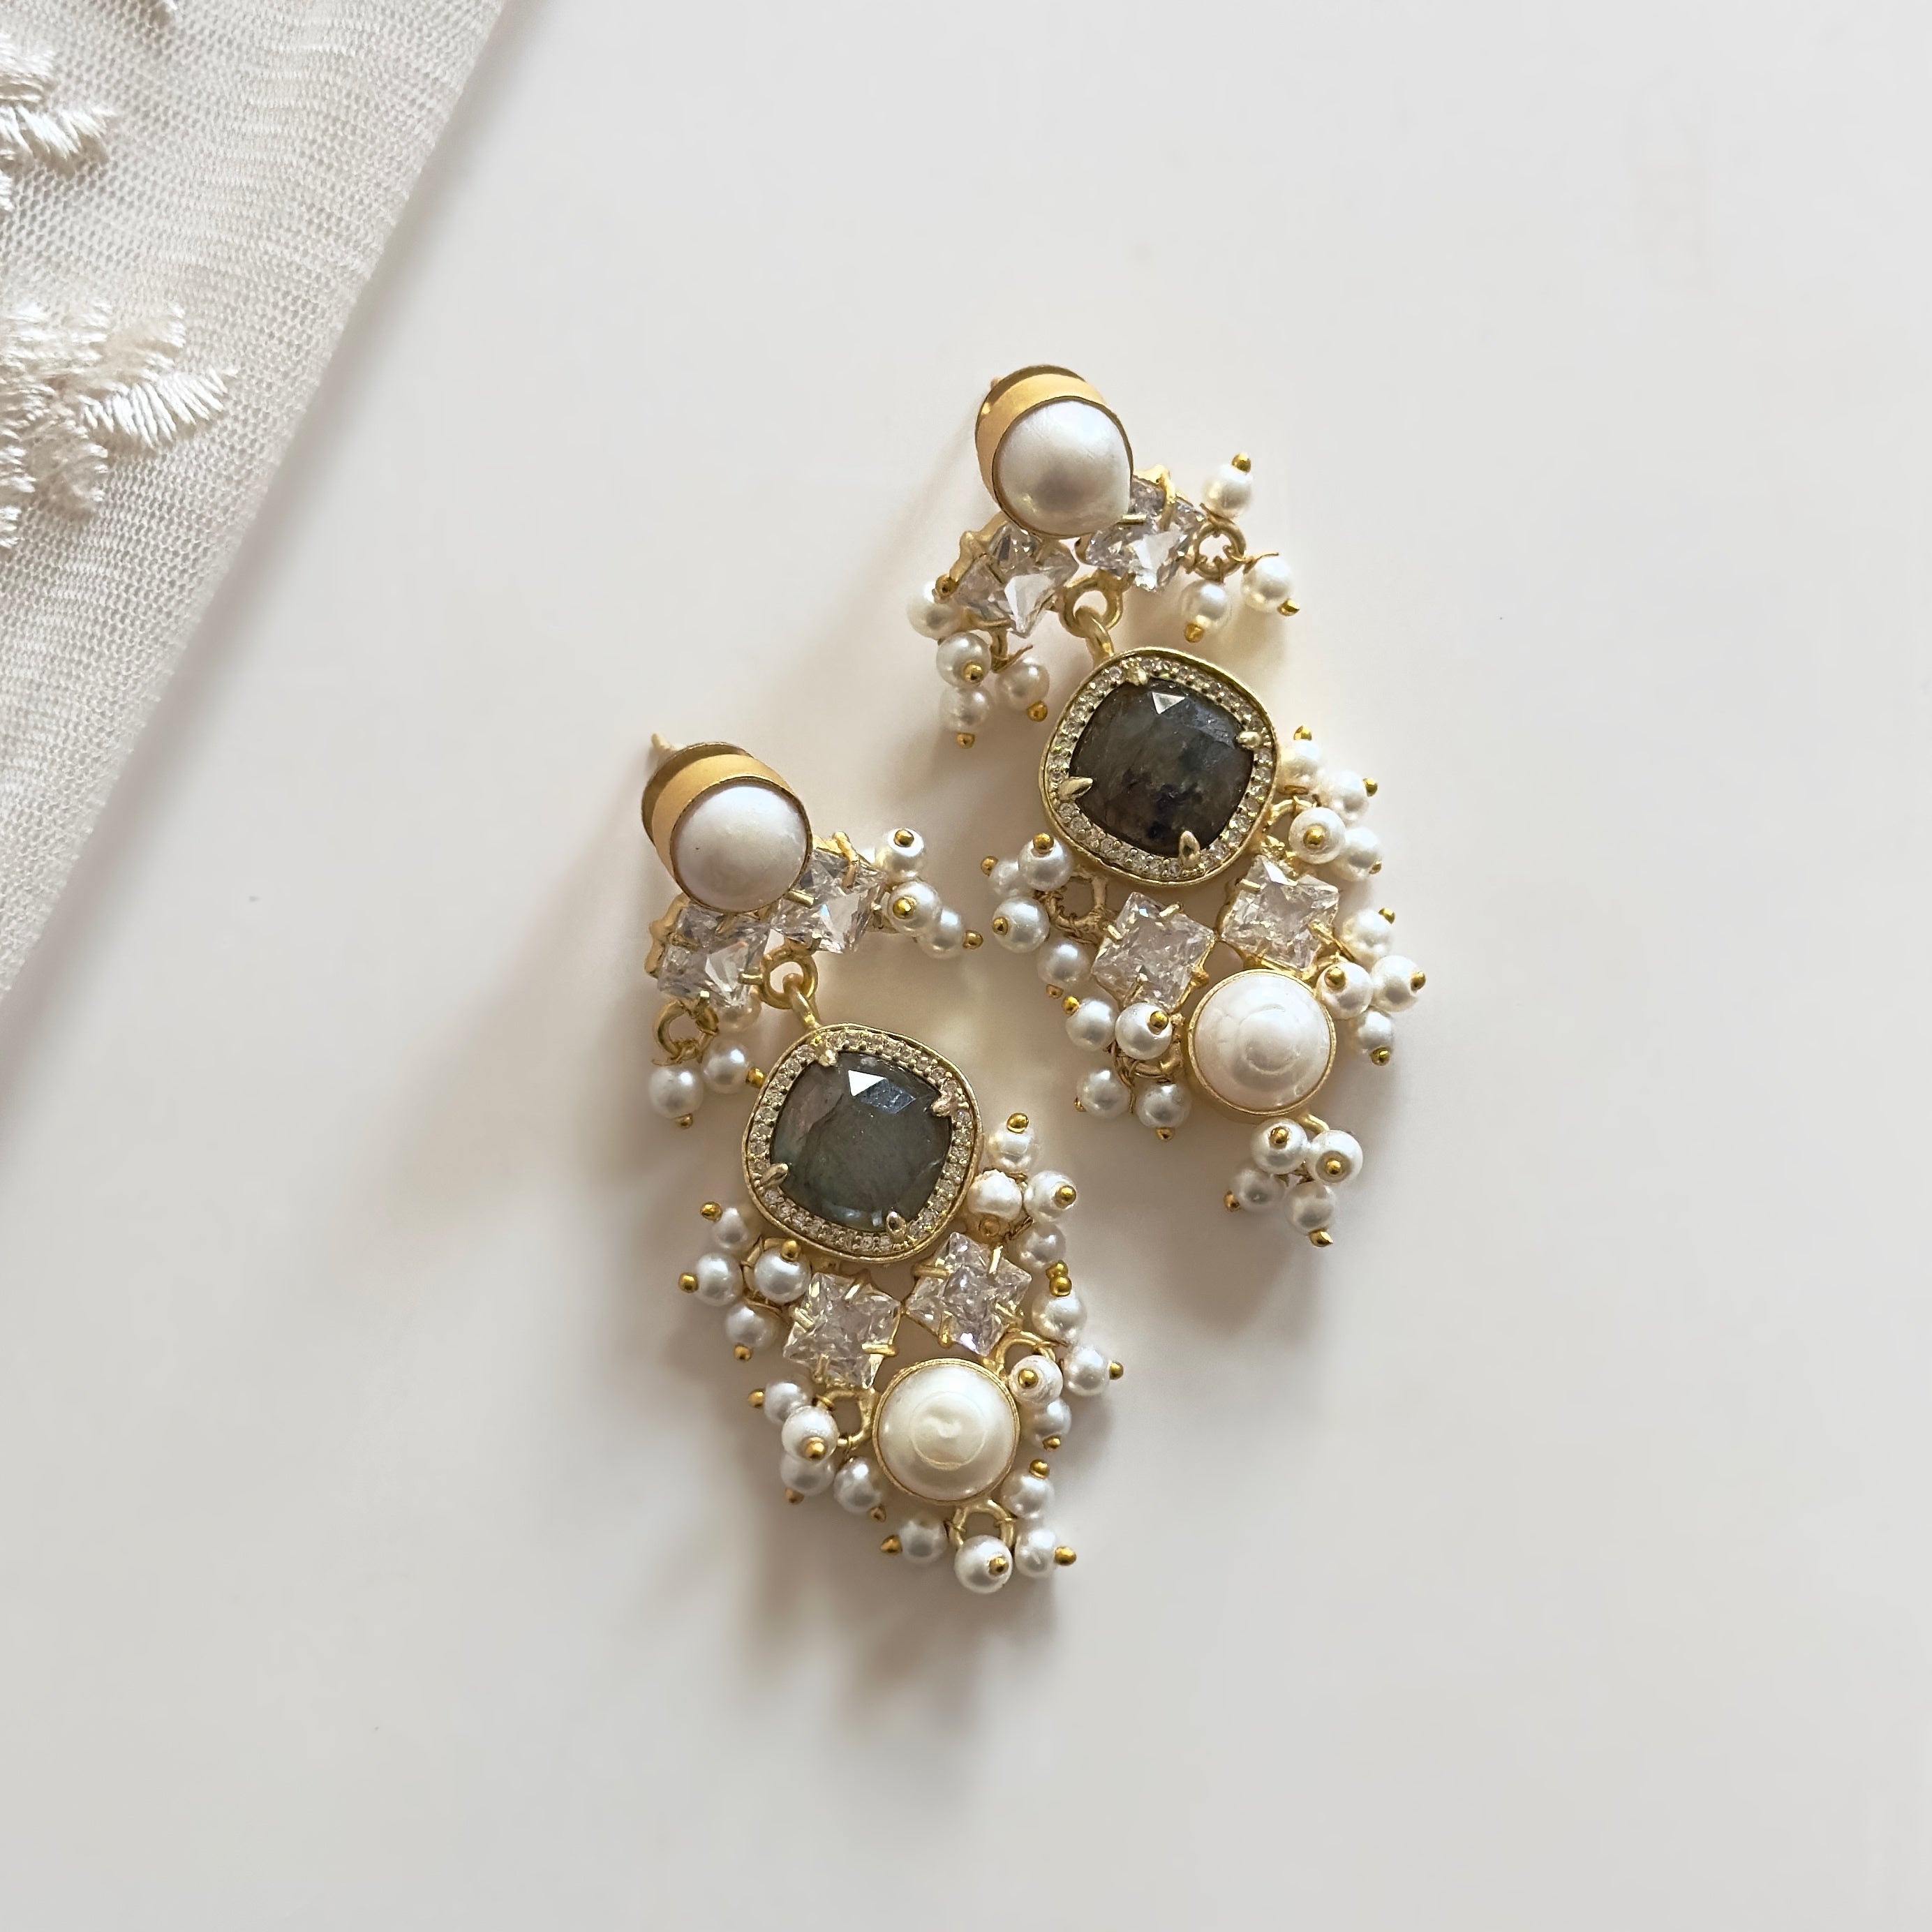 Enhance your look with the Sana Crystal Drop Earrings. Made with luscious labradorite stones, pearls, and CZ crystals, these earrings exude elegance and sophistication. The iridescent hues of the labradorite stones and the shimmering accents of the pearls and CZ crystals will add a touch of glamour to any outfit.